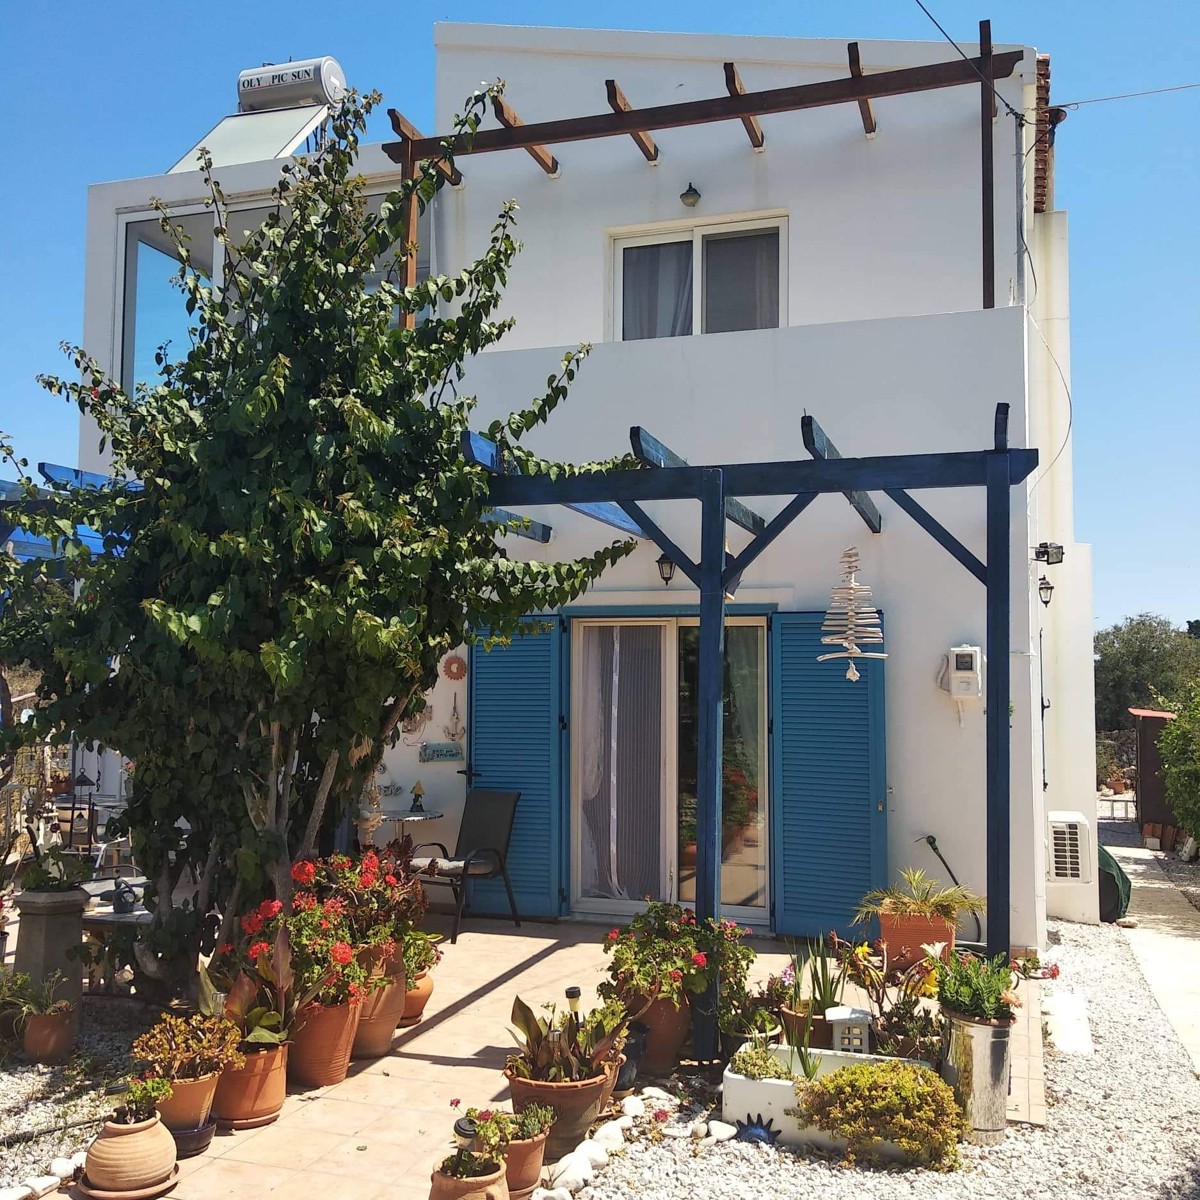 4 Bed Detached Villa for Sale in the Village of Paleloni Apokoronas